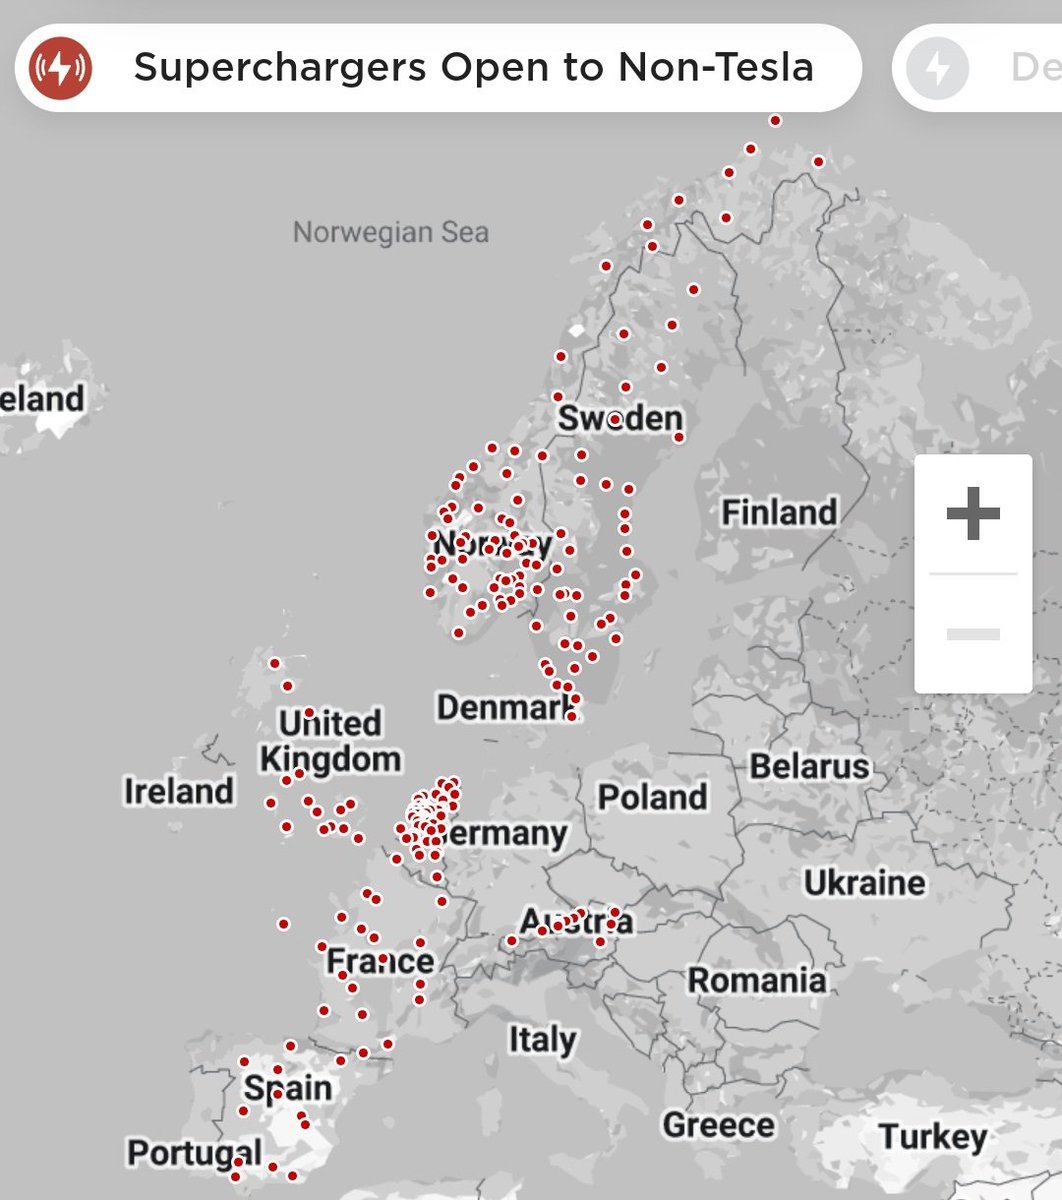 8️⃣ European countries with open superchargers for non Tesla vehicles ⚡#evRevolution
🇫🇷 🇳🇱🇳🇴🇬🇧🇪🇸🇨🇭🇧🇪🇦🇹